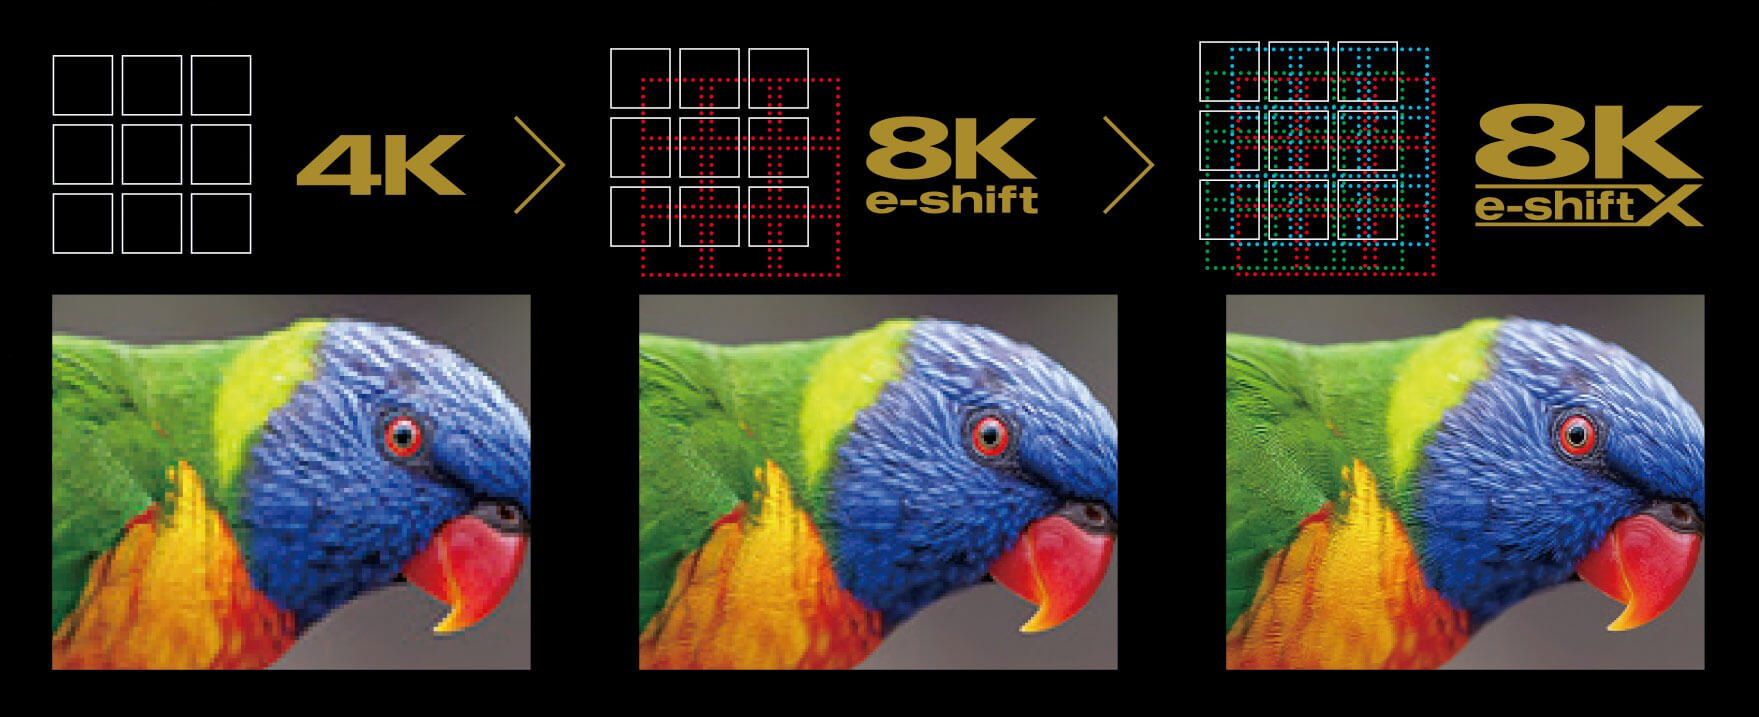 4k resolution against 8k resolution against JVC's 8k eshiftX resolution with parrots 